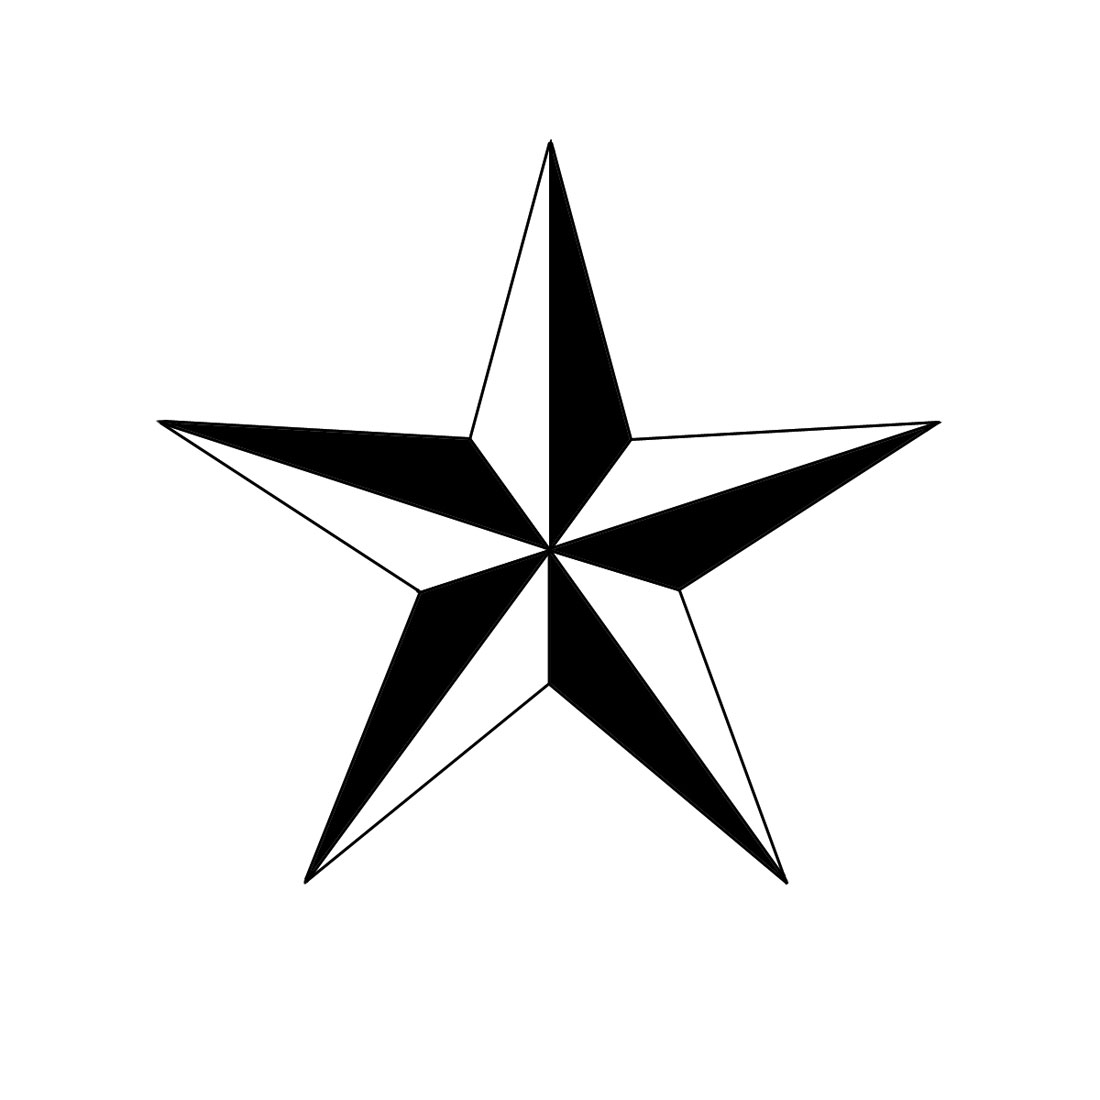 Stars Line Drawing - ClipArt Best